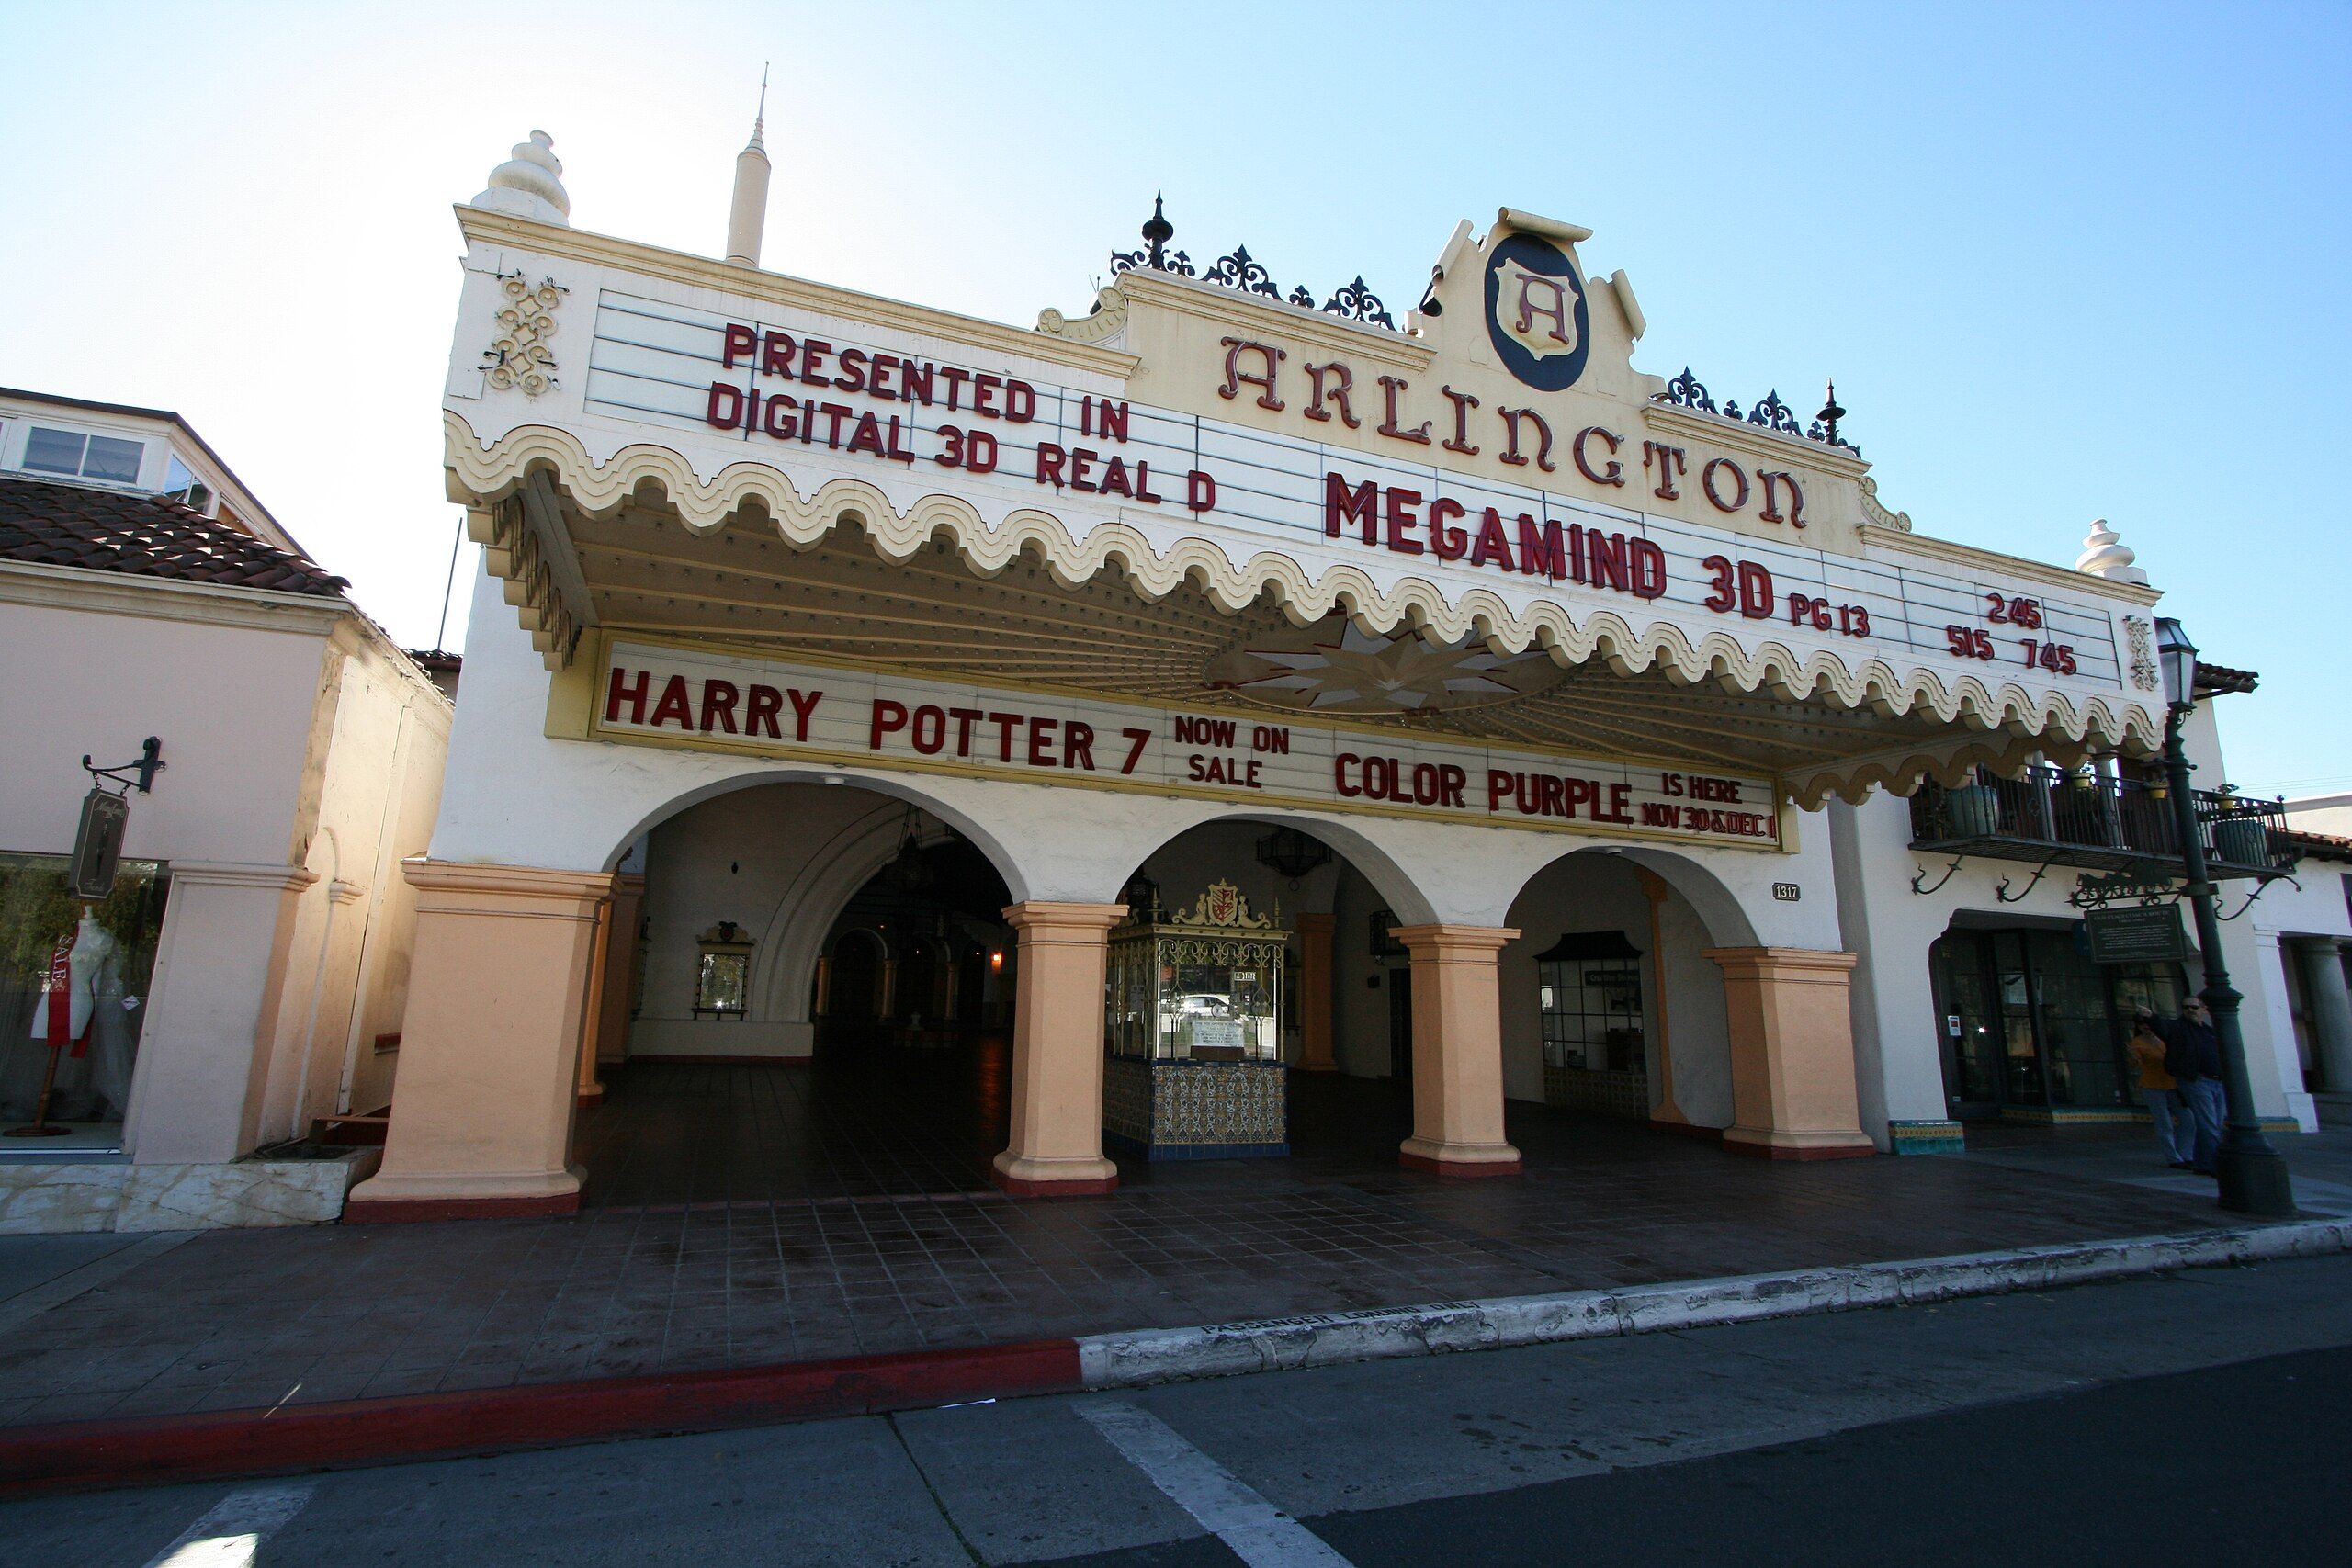 The facade and markee of the Arlington Theater in Santa Barbara, with its three-arched entryway and blue sky overhead.